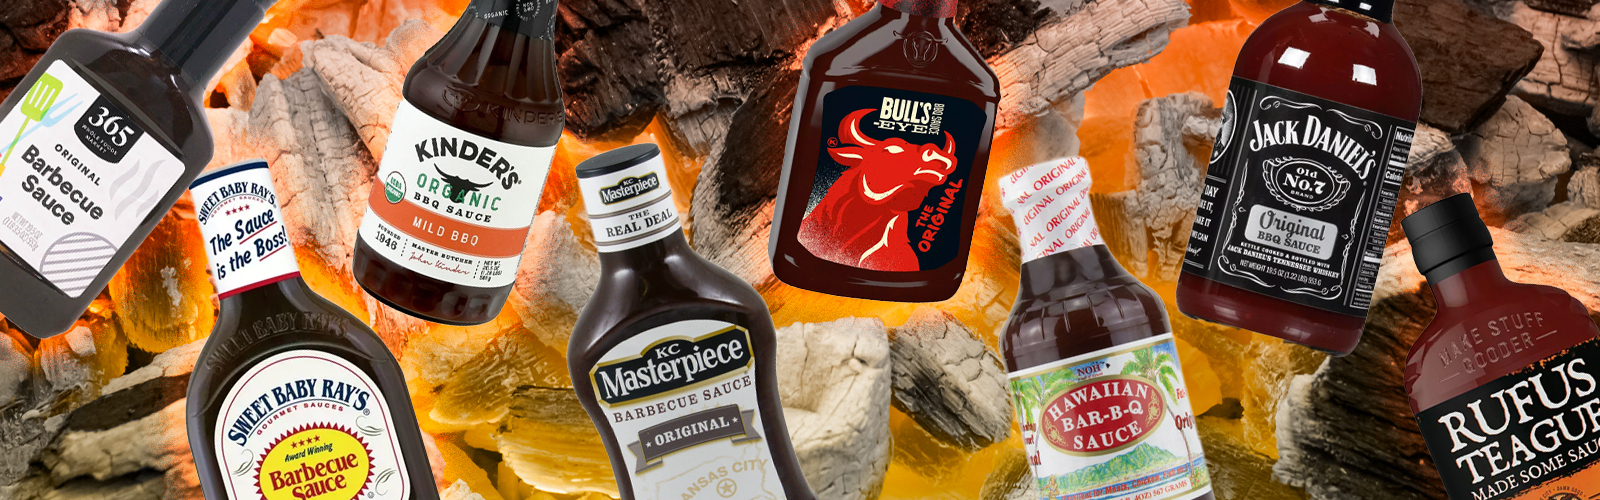 11 Barbecue Sauces Ranked From Best to Worst - Let's Eat Cake